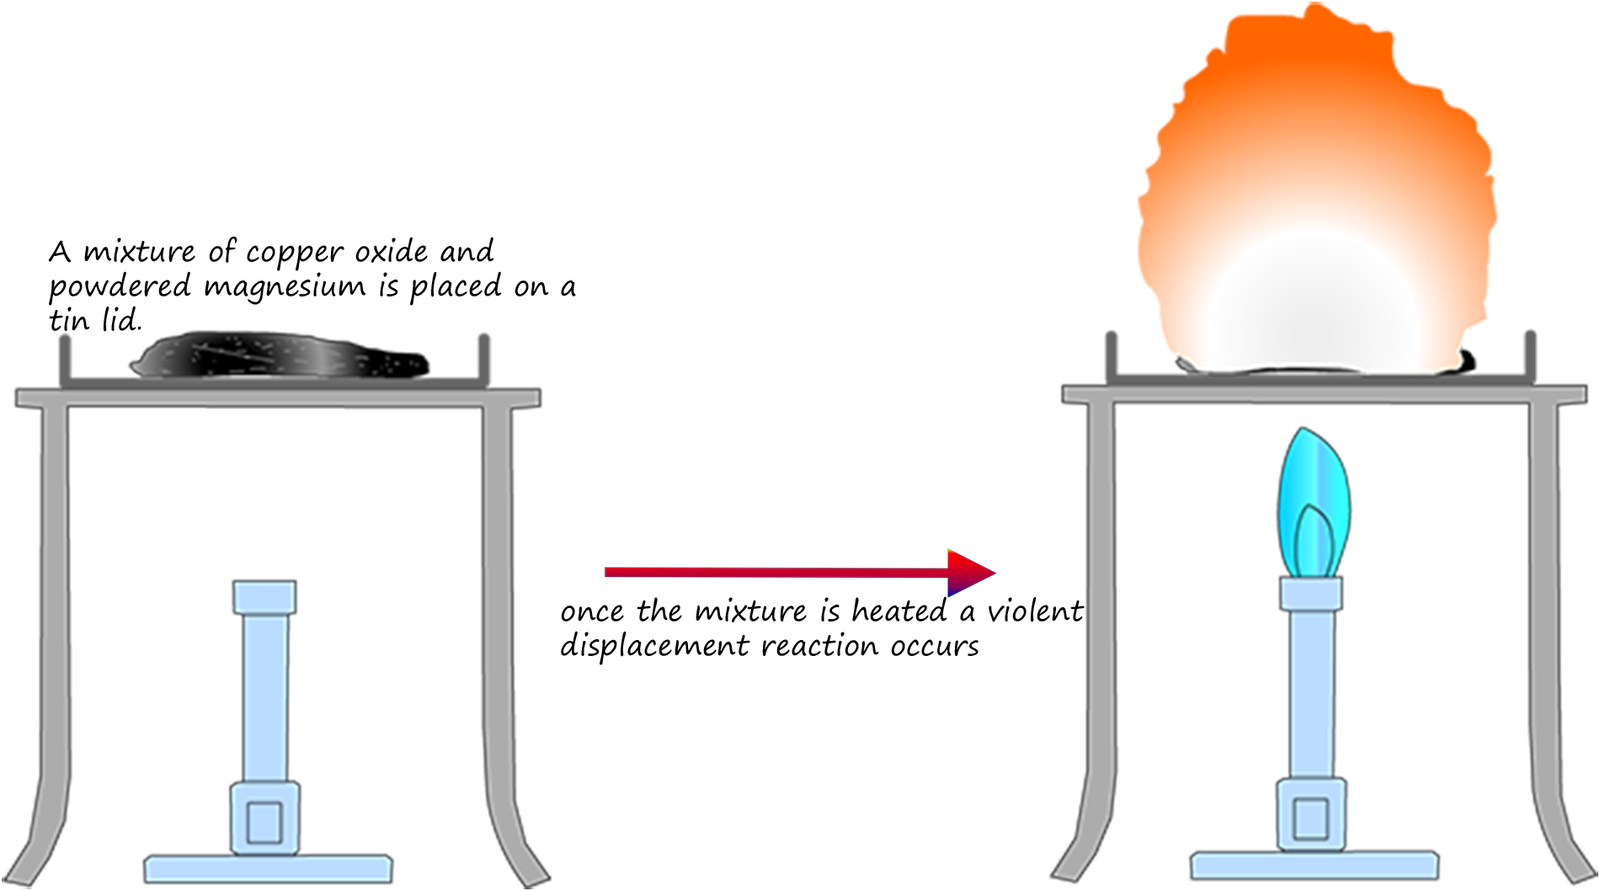 displacement reactions involving solids